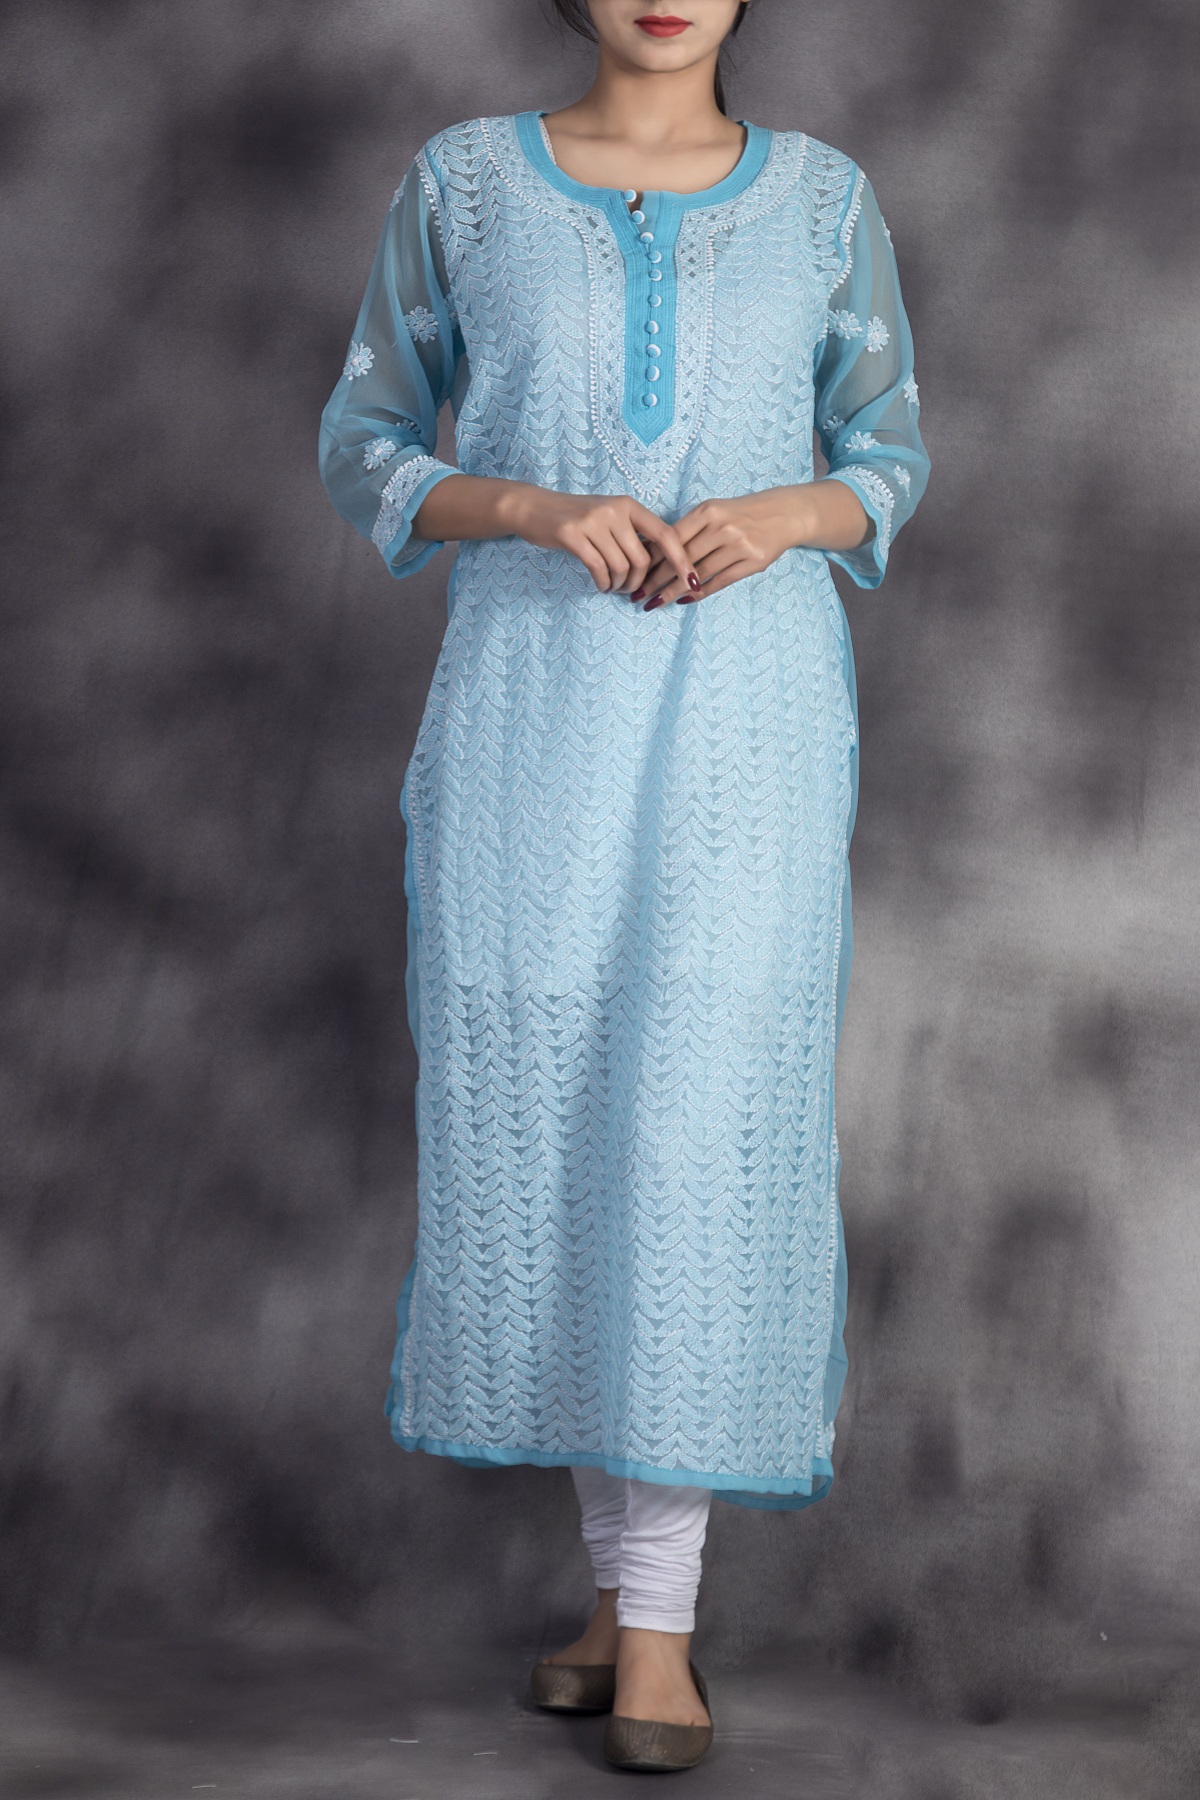 Lucknowi Chikan Kurti - Lucknowi Chikan Kurti buyers, suppliers, importers,  exporters and manufacturers - Latest price and trends